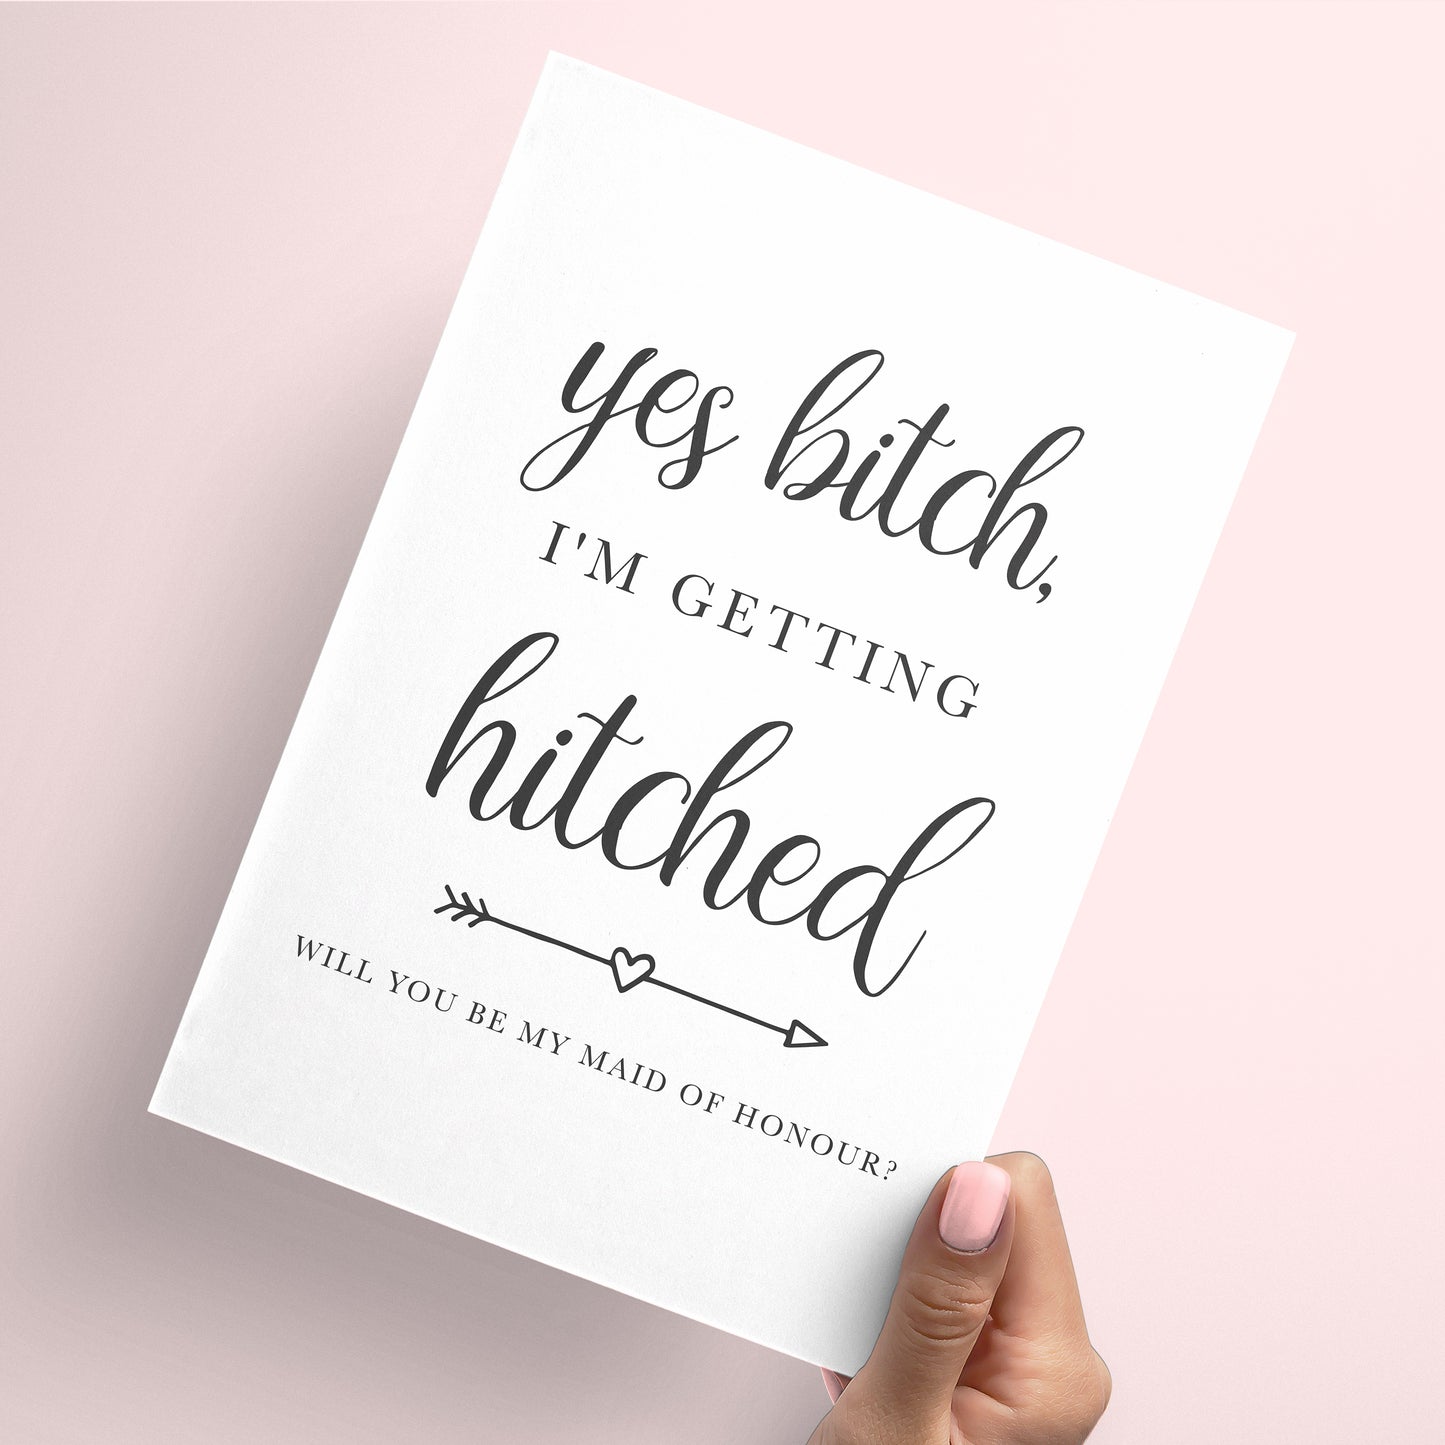 Yes bitch I'm getting hitched maid of honour card